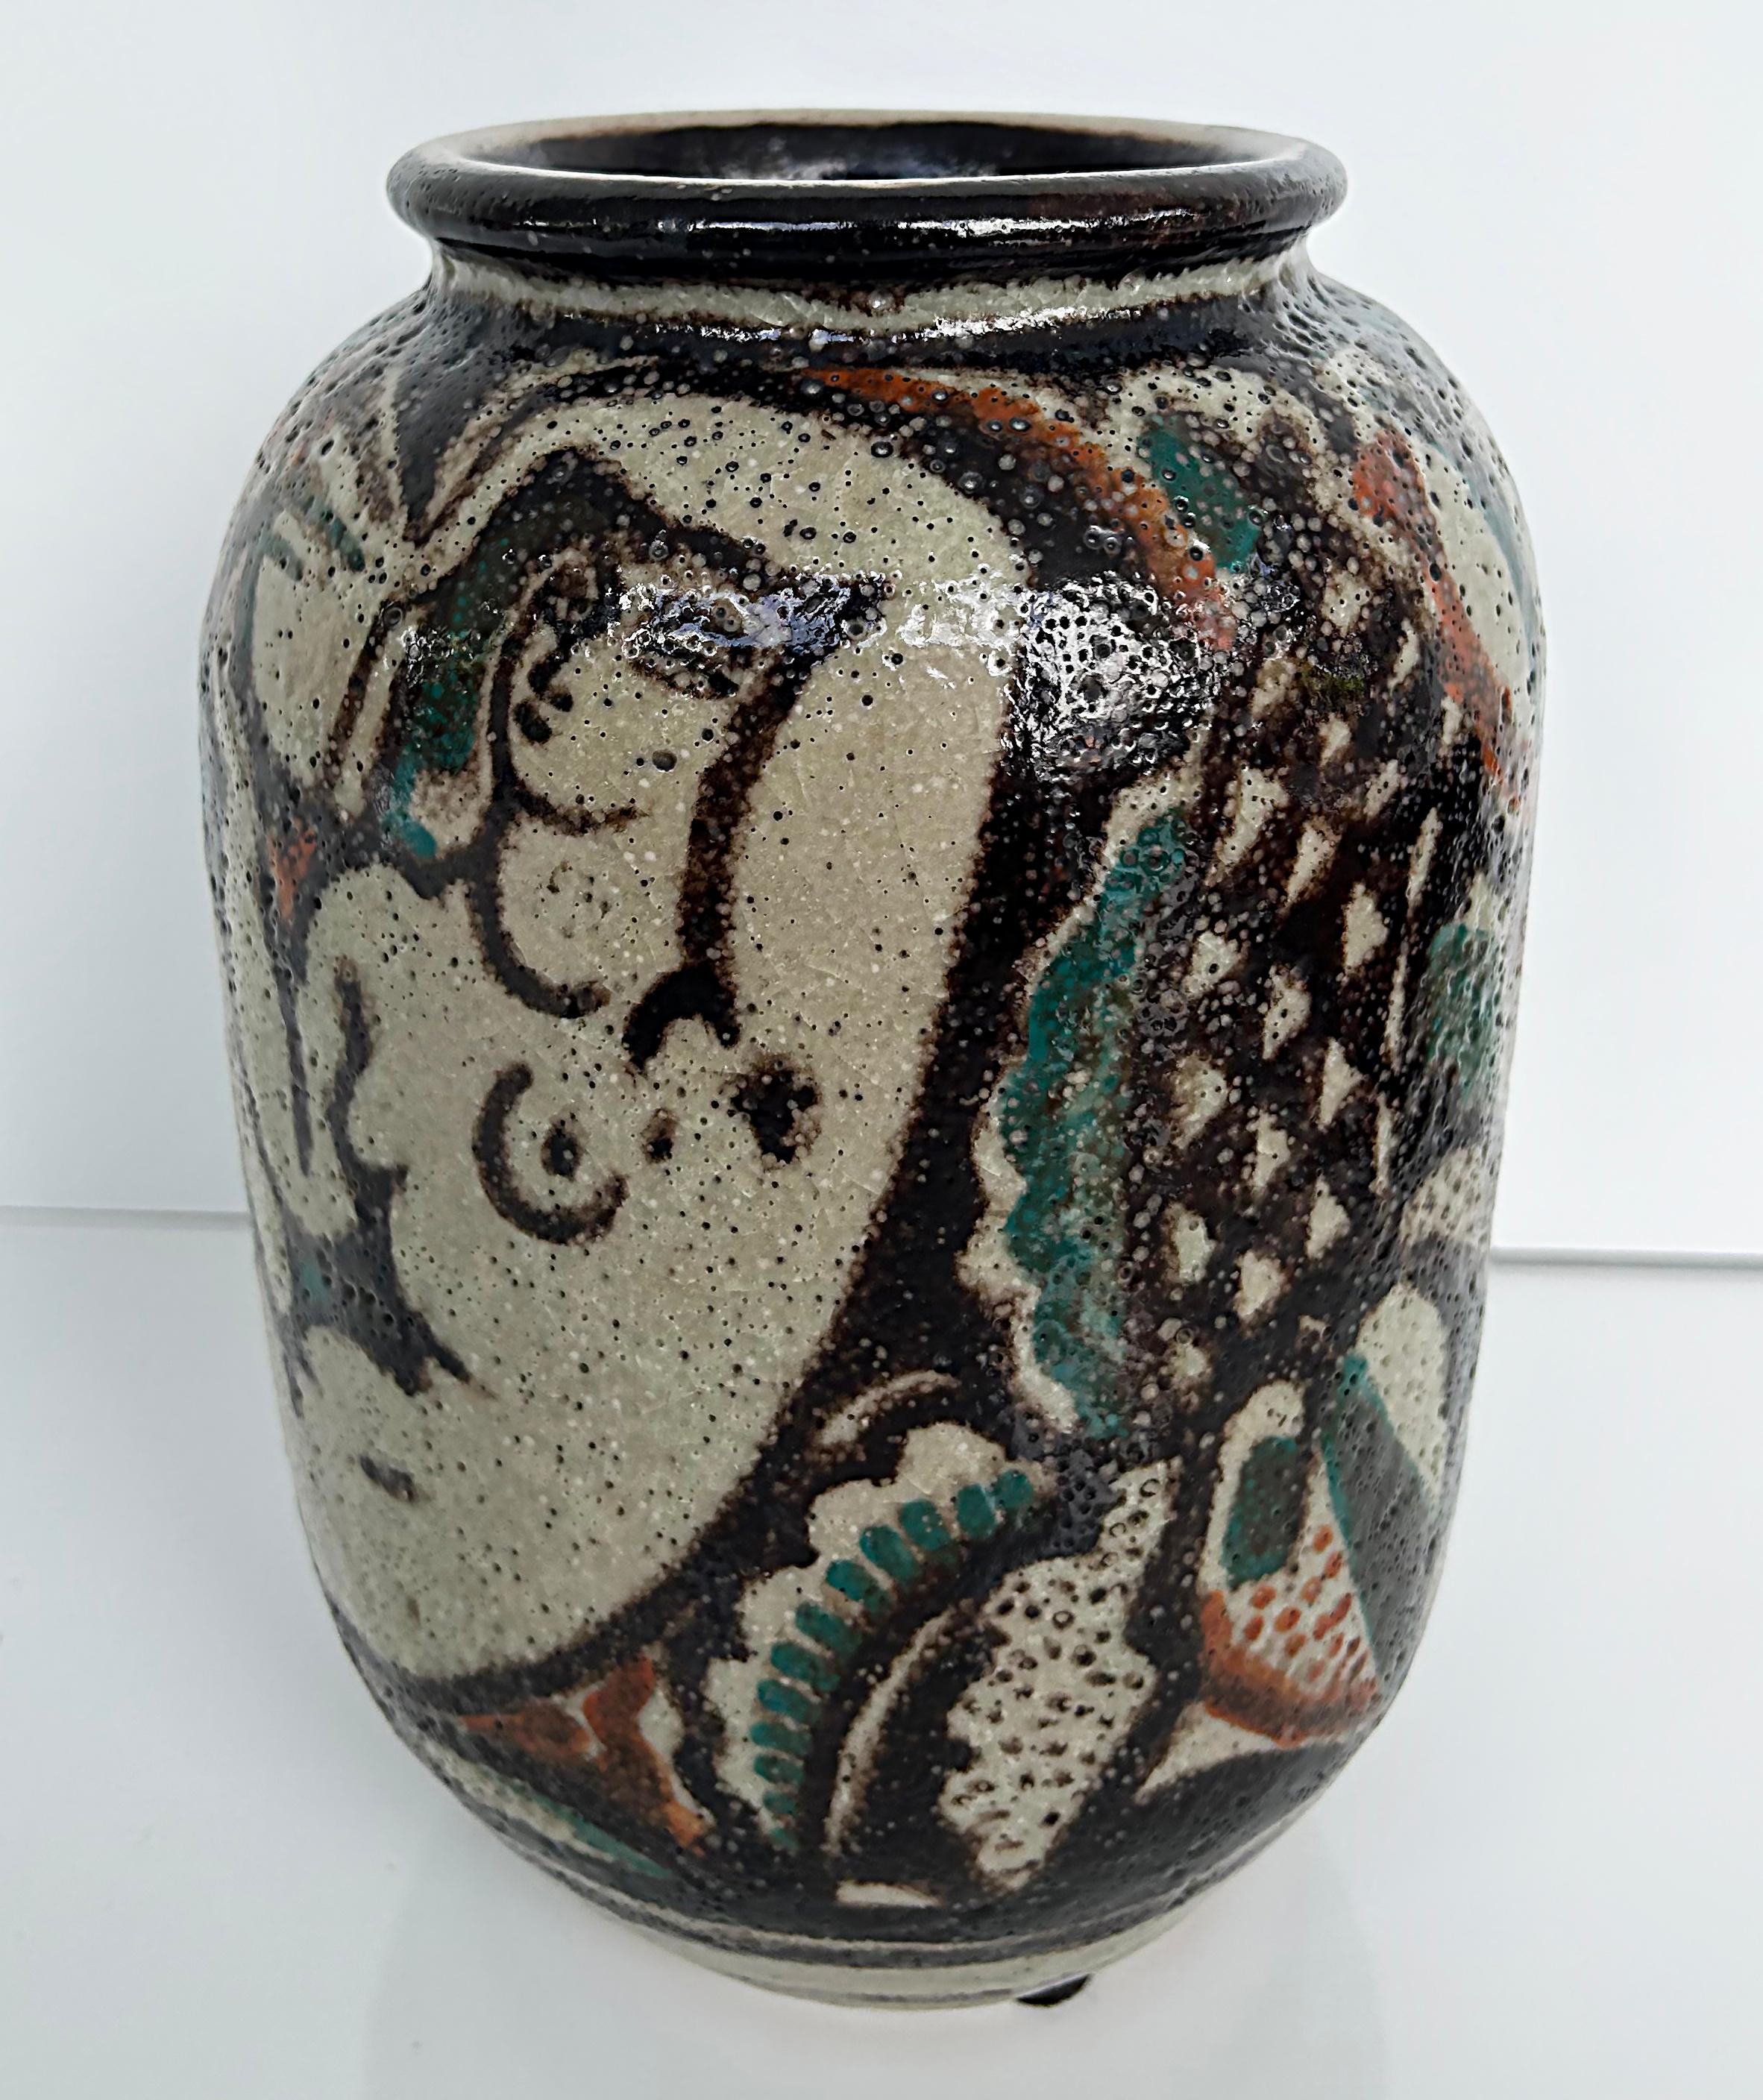 Rene Buthaud French Ceramist Vase with Nude Figures

Offered for sale is a vase with nude figures by the French Ceramist René Buthaud (1886-1986). The vase has a textured glaze finish and is signed by the artist on the base as shown. The mark is